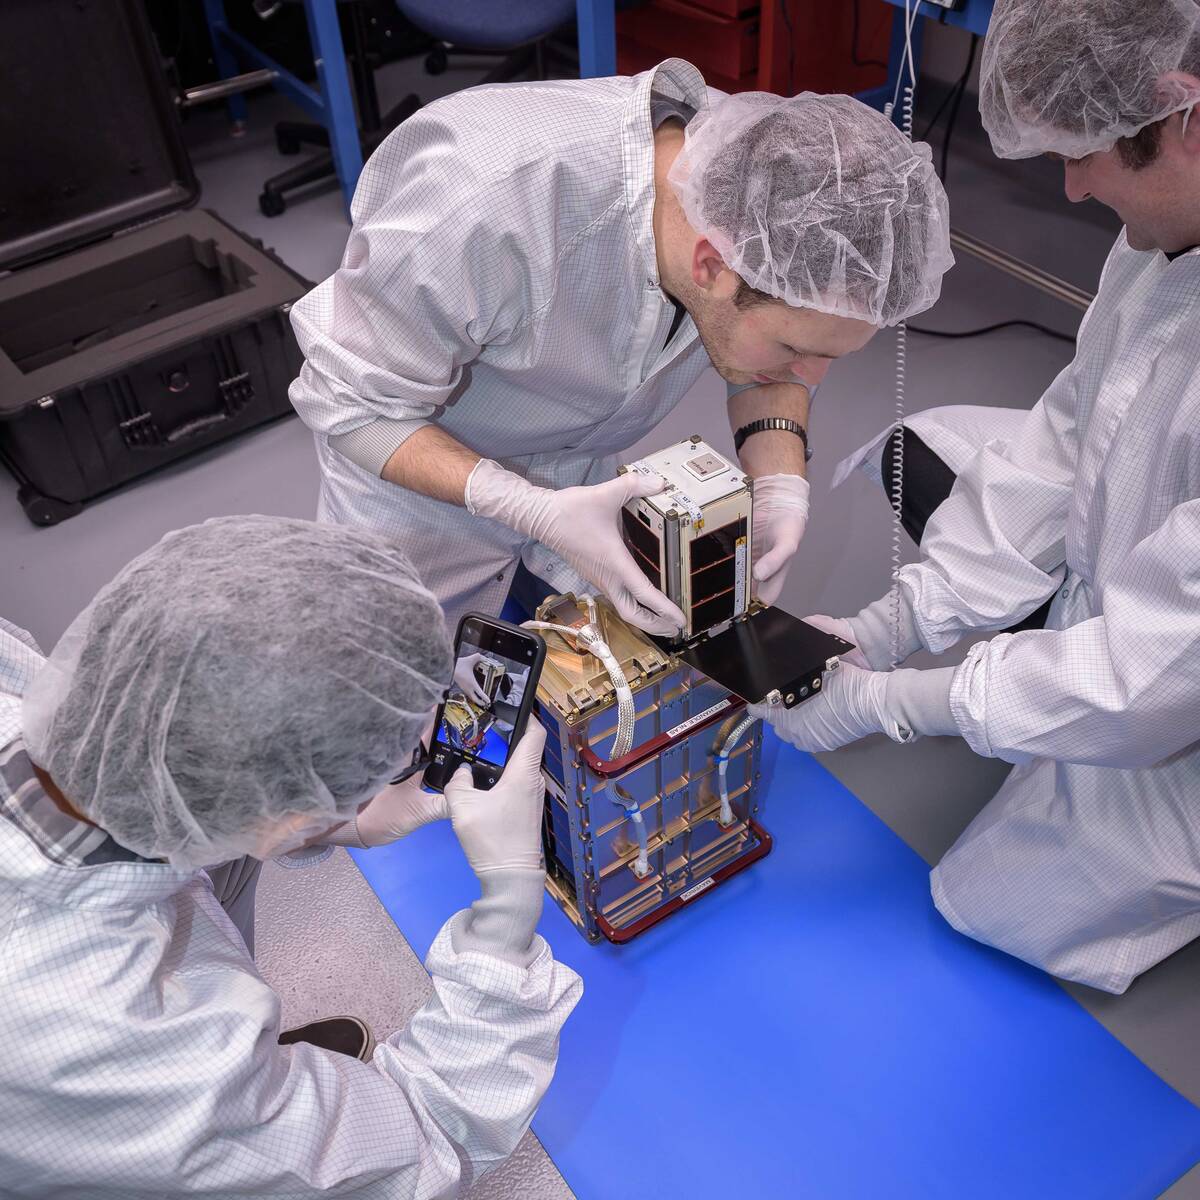 Max Holliday, middle, installs one of the four PyCubed-Based CubeSat (PY4) spacecraft into the Small Satellites Dispenser.